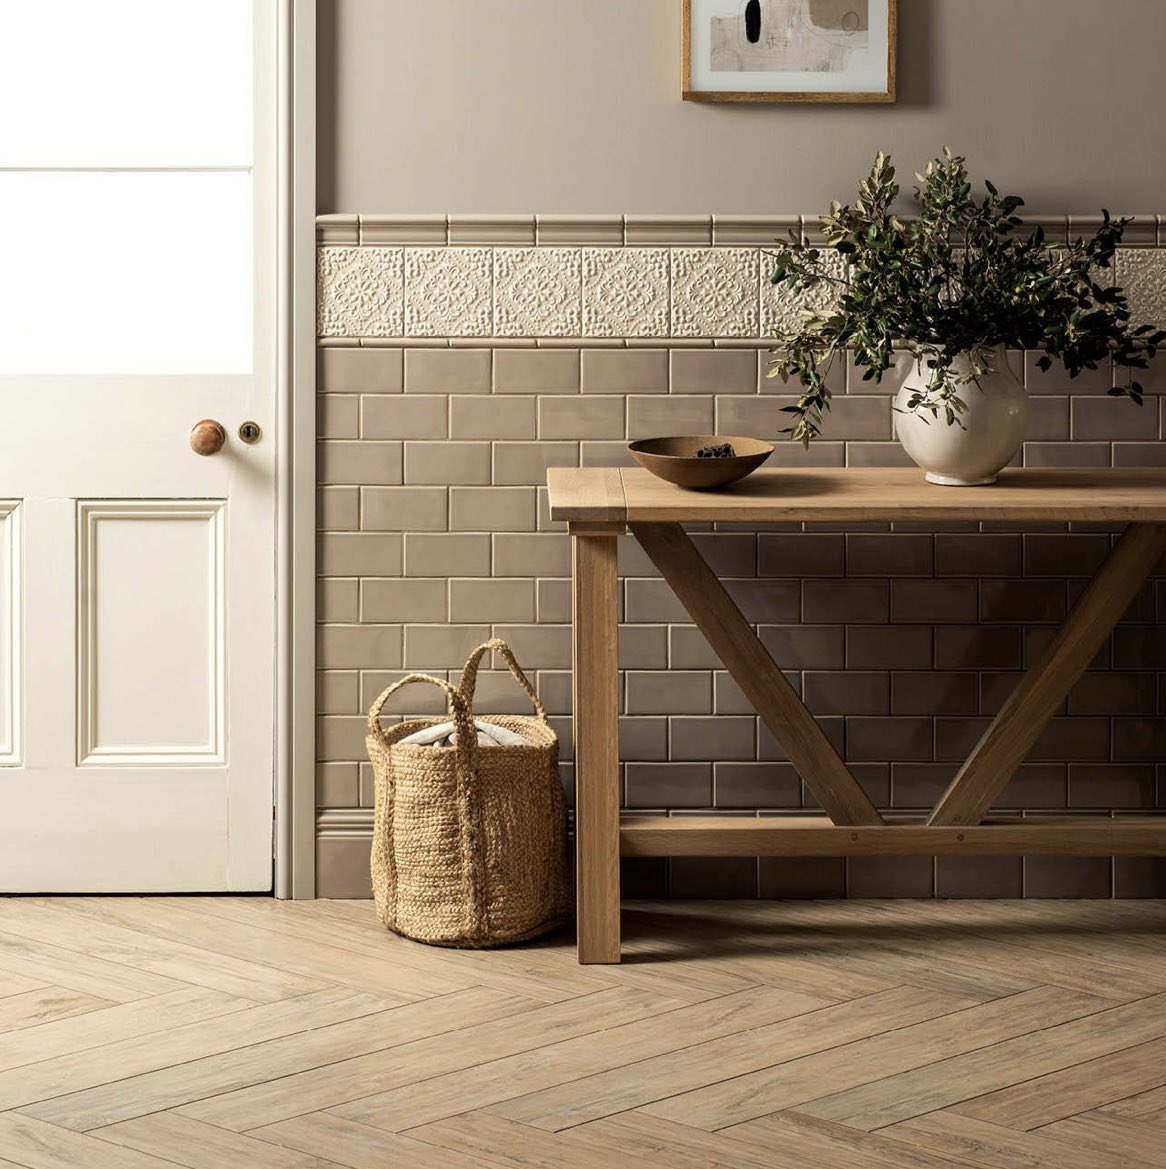 ⚜️ Highgrove by Original Style ⚜️ Beautiful embossed ceramic tiles available in four soft colours with a timeless appeal. #walltiles #ceramictiles #timelessdesign #tileinspo #kitchentiles #bathroomtiles #originalstyle @OriginalStyleUK